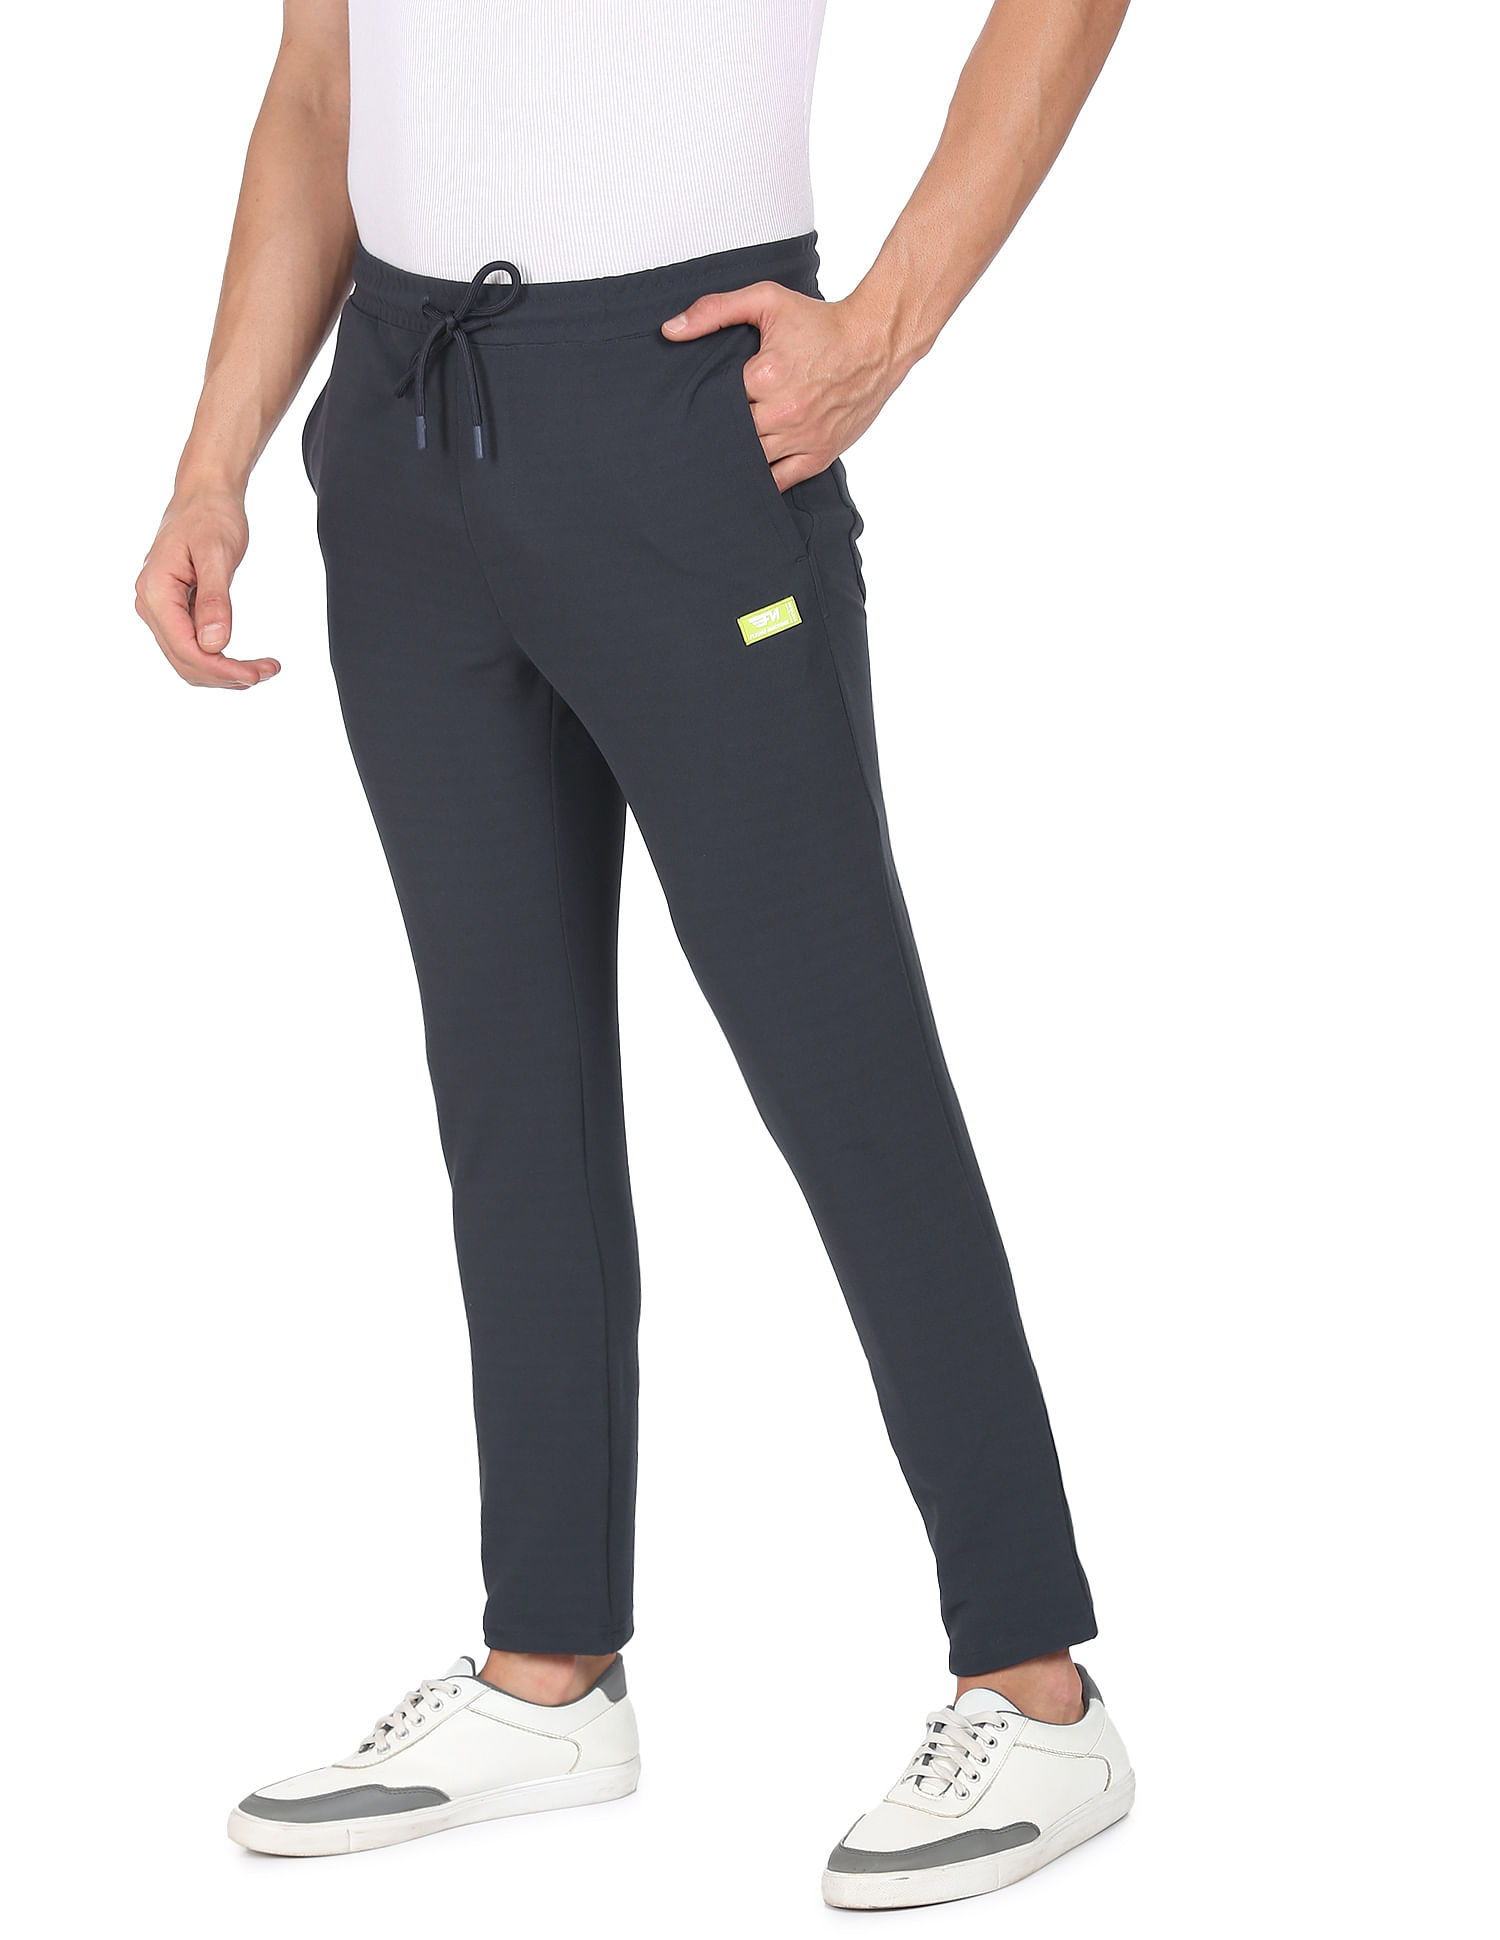 DBURKE Track Pants for Men and Women | 100% Polyester As Fabric | Stylish  Design for Men and Women | Solid Pattern Track Pant Size - M Color - Black  Regular Fit : Amazon.in: Clothing & Accessories